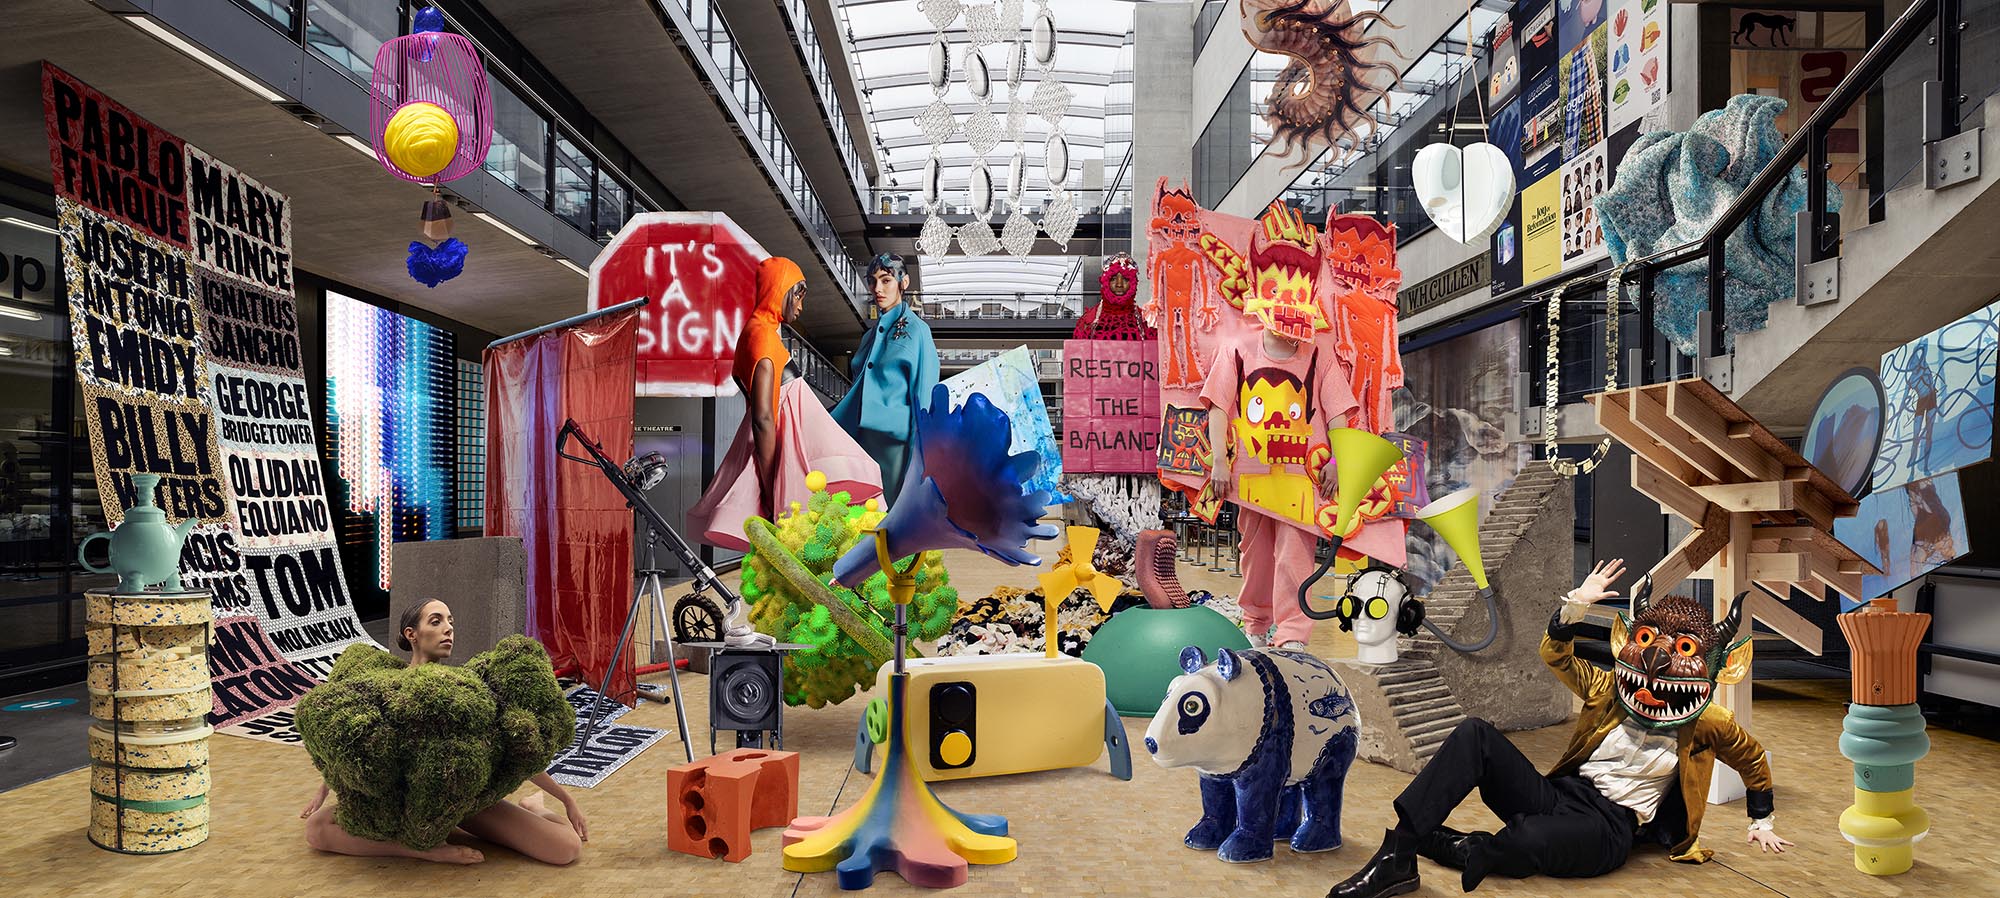 Composite image bringing colourful pieces of work into the Central Saint Martins' building